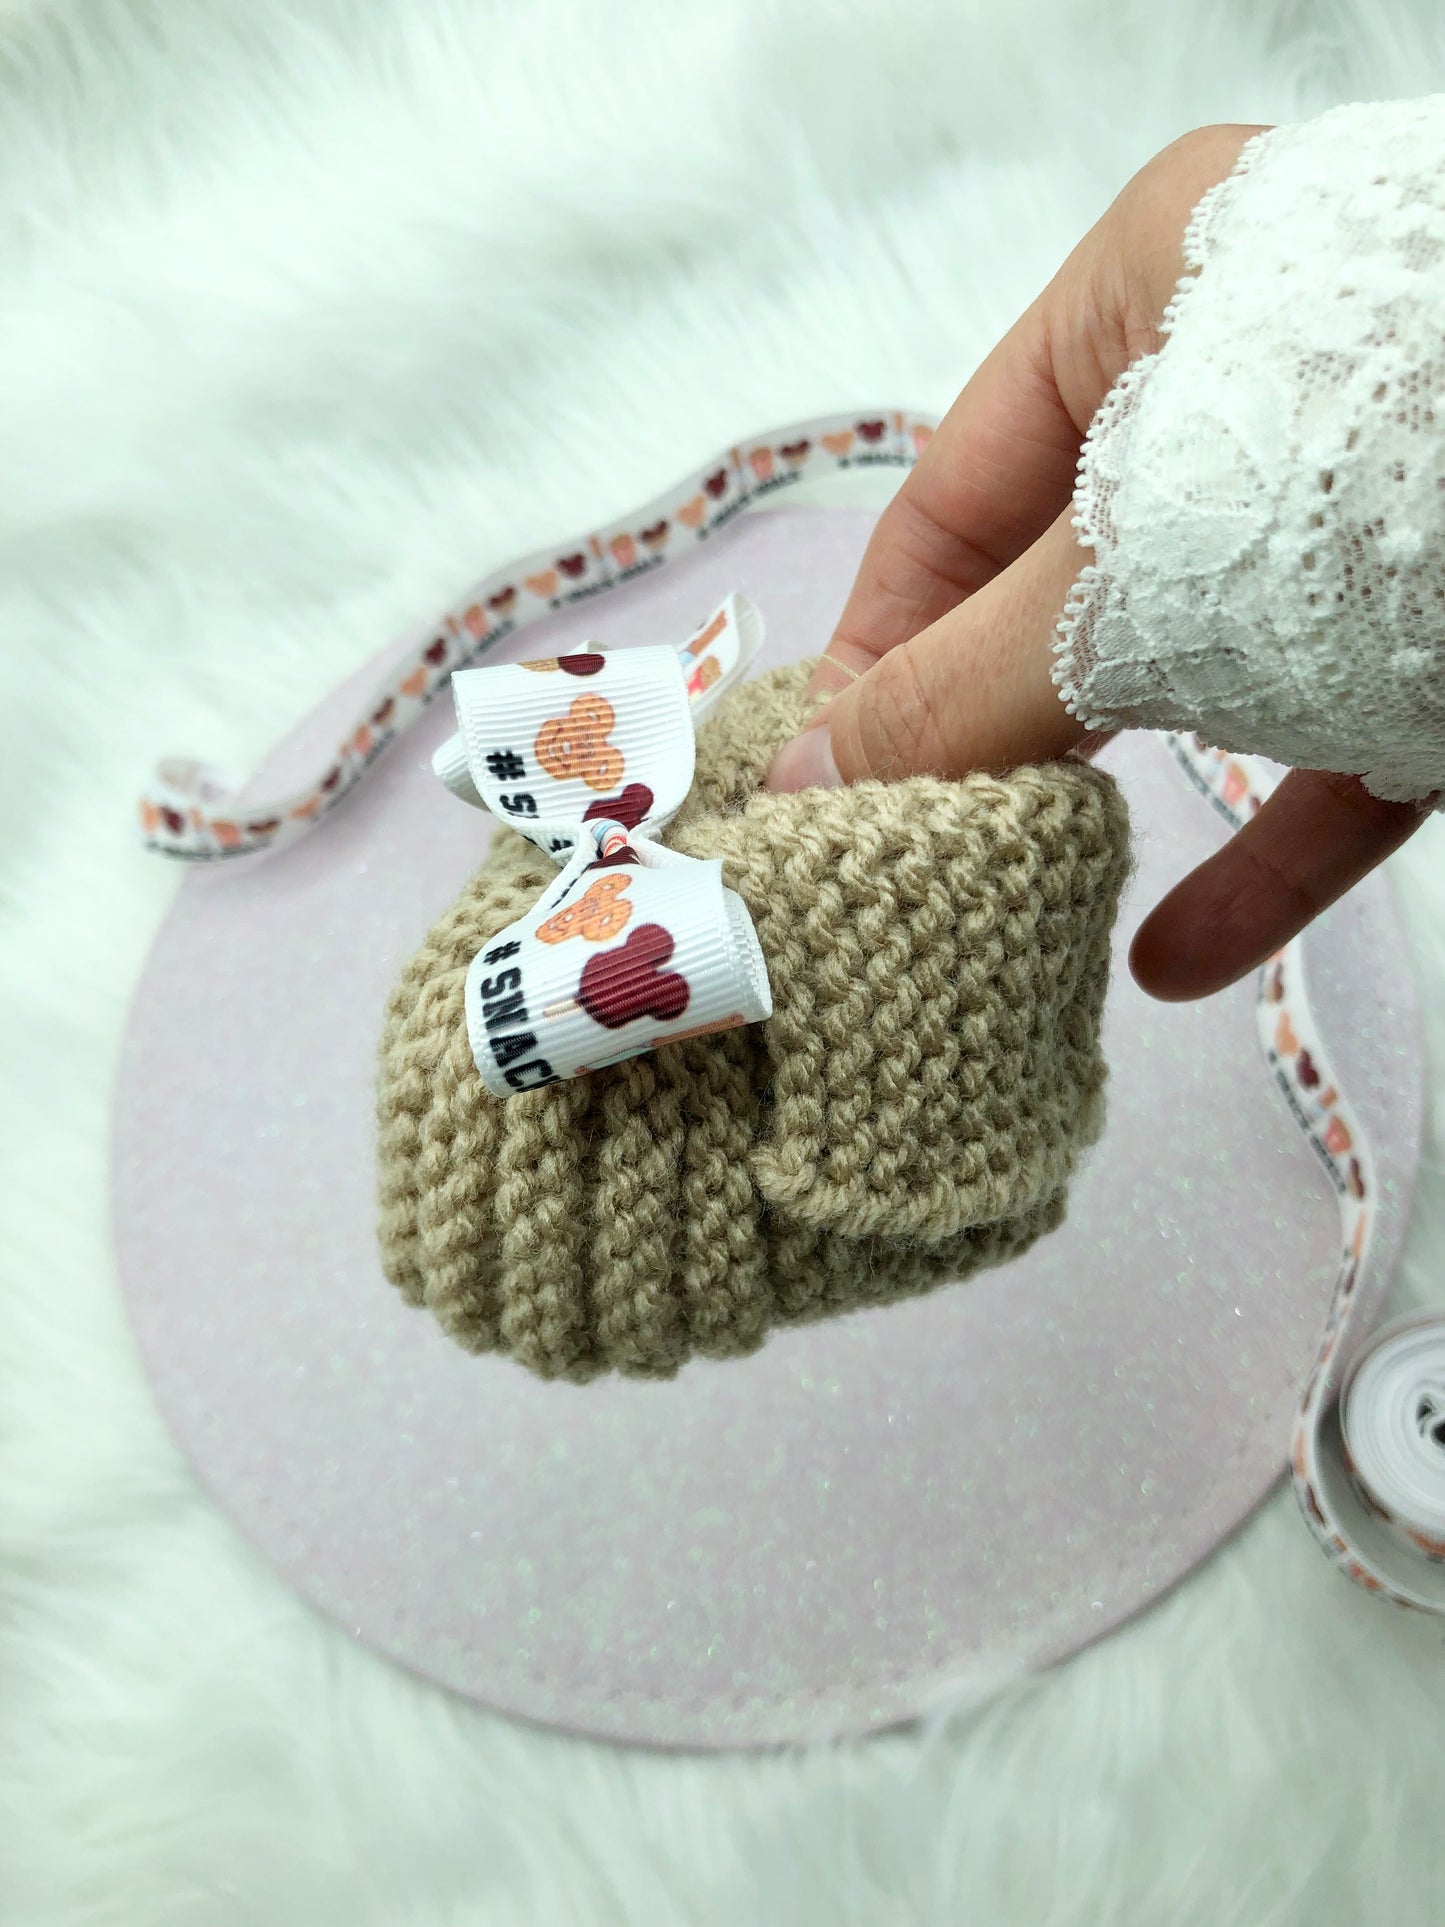 Chaussons au tricot "#snack goals"